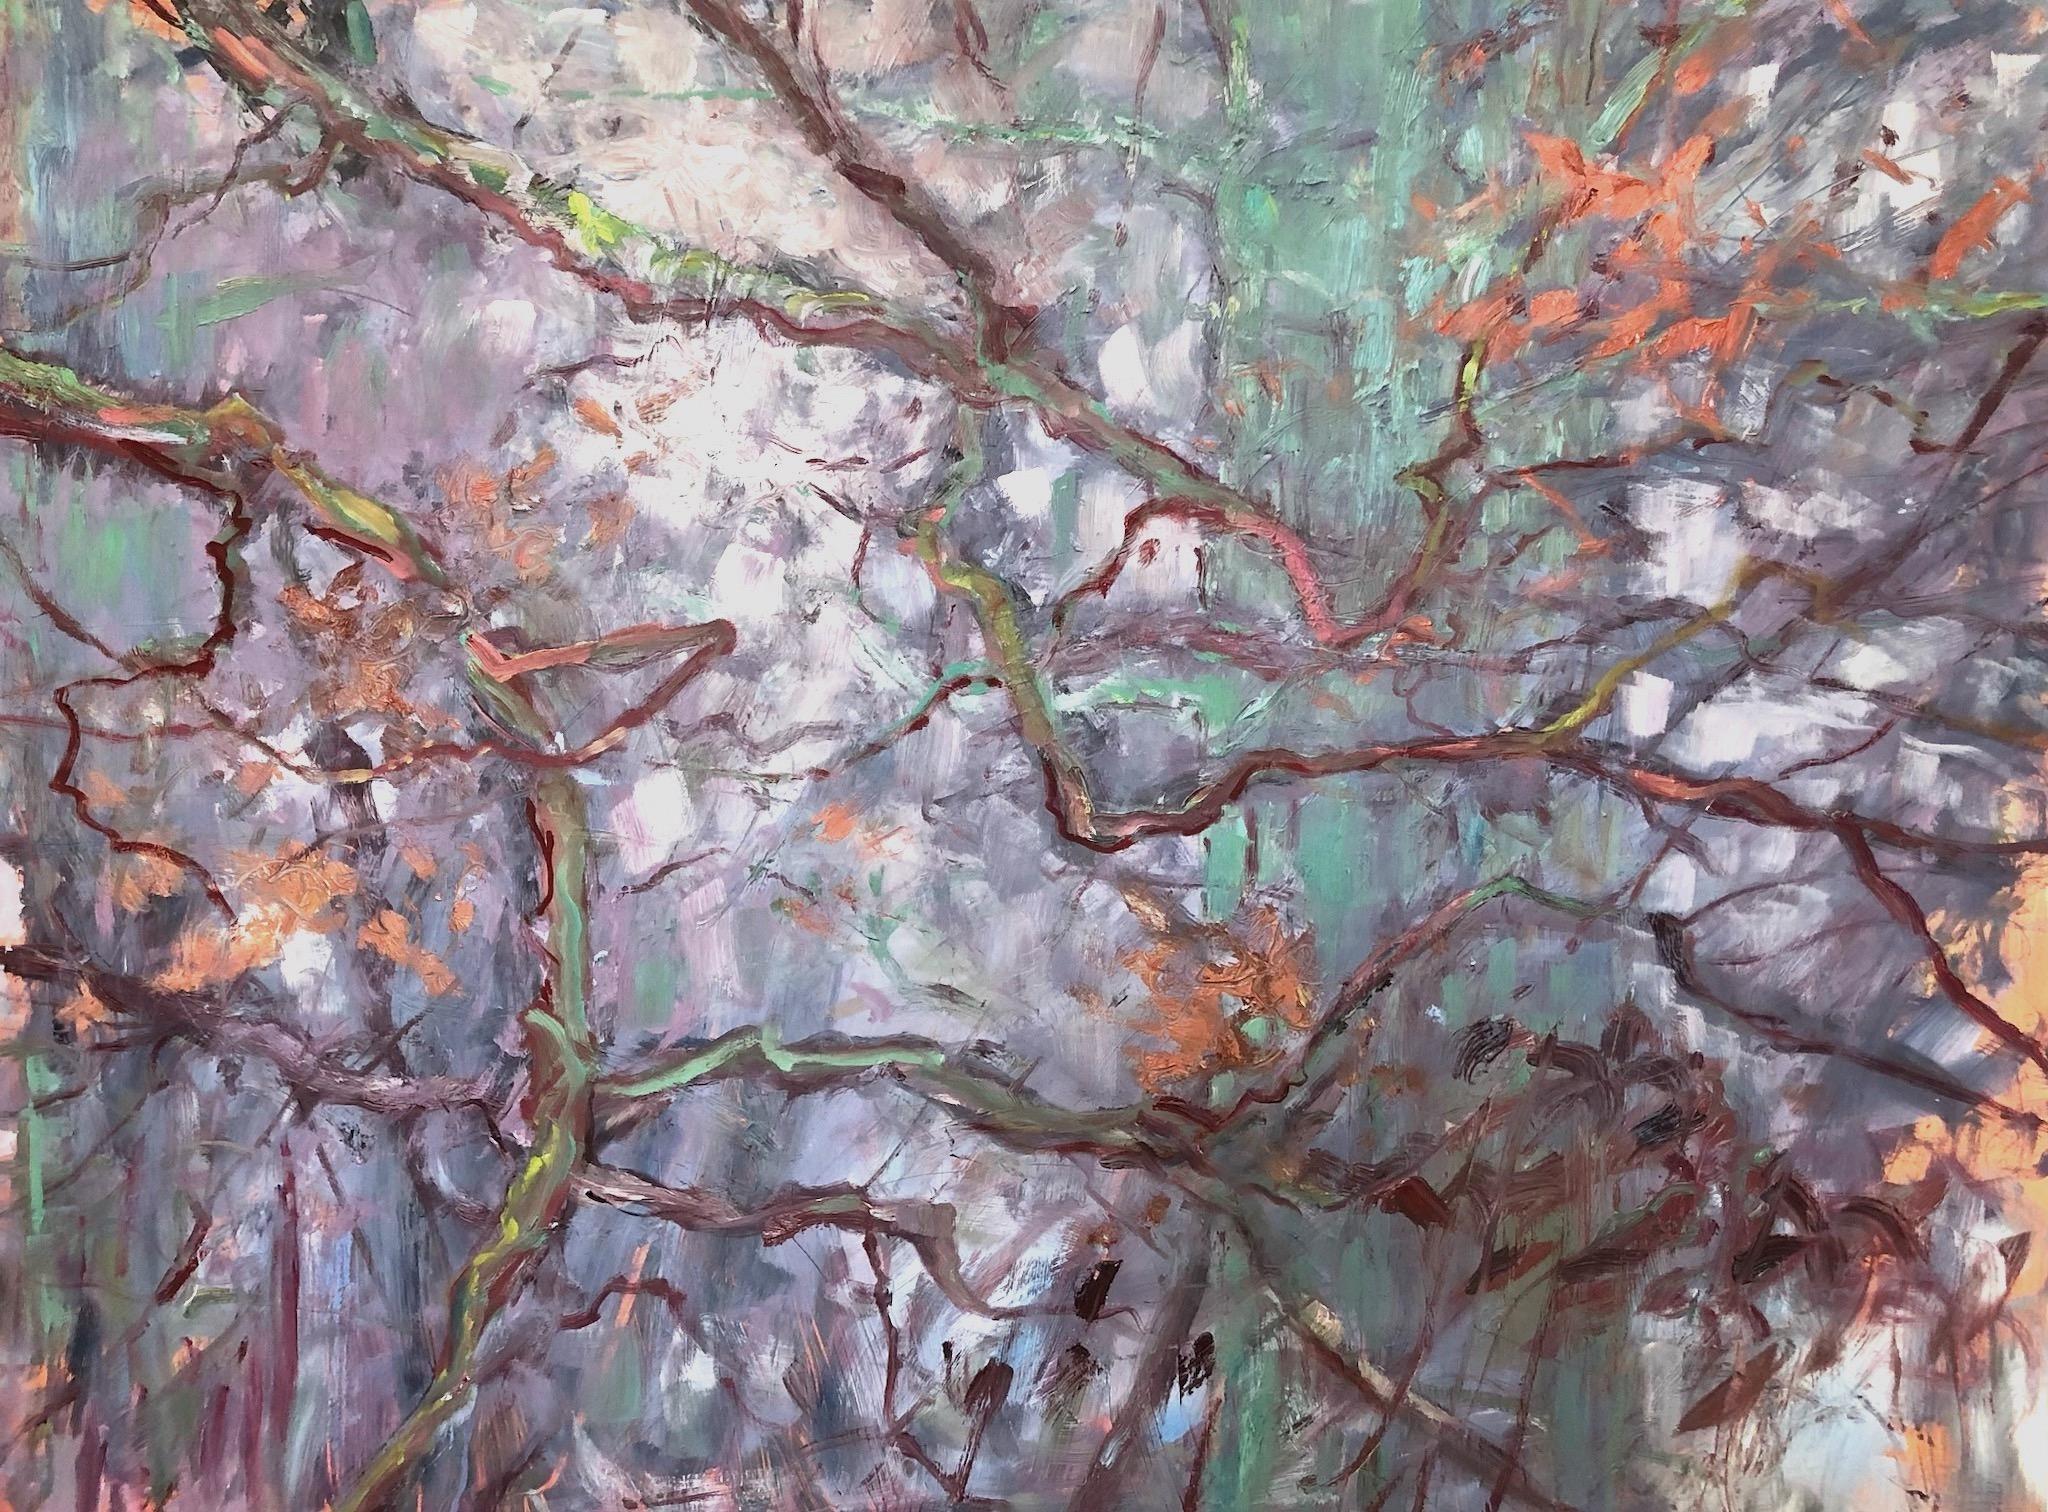 Catherine Picard-Gibbs Landscape Painting - "Limbs", contemporary, trees, branch, purple, blue, green, salmon, oil painting